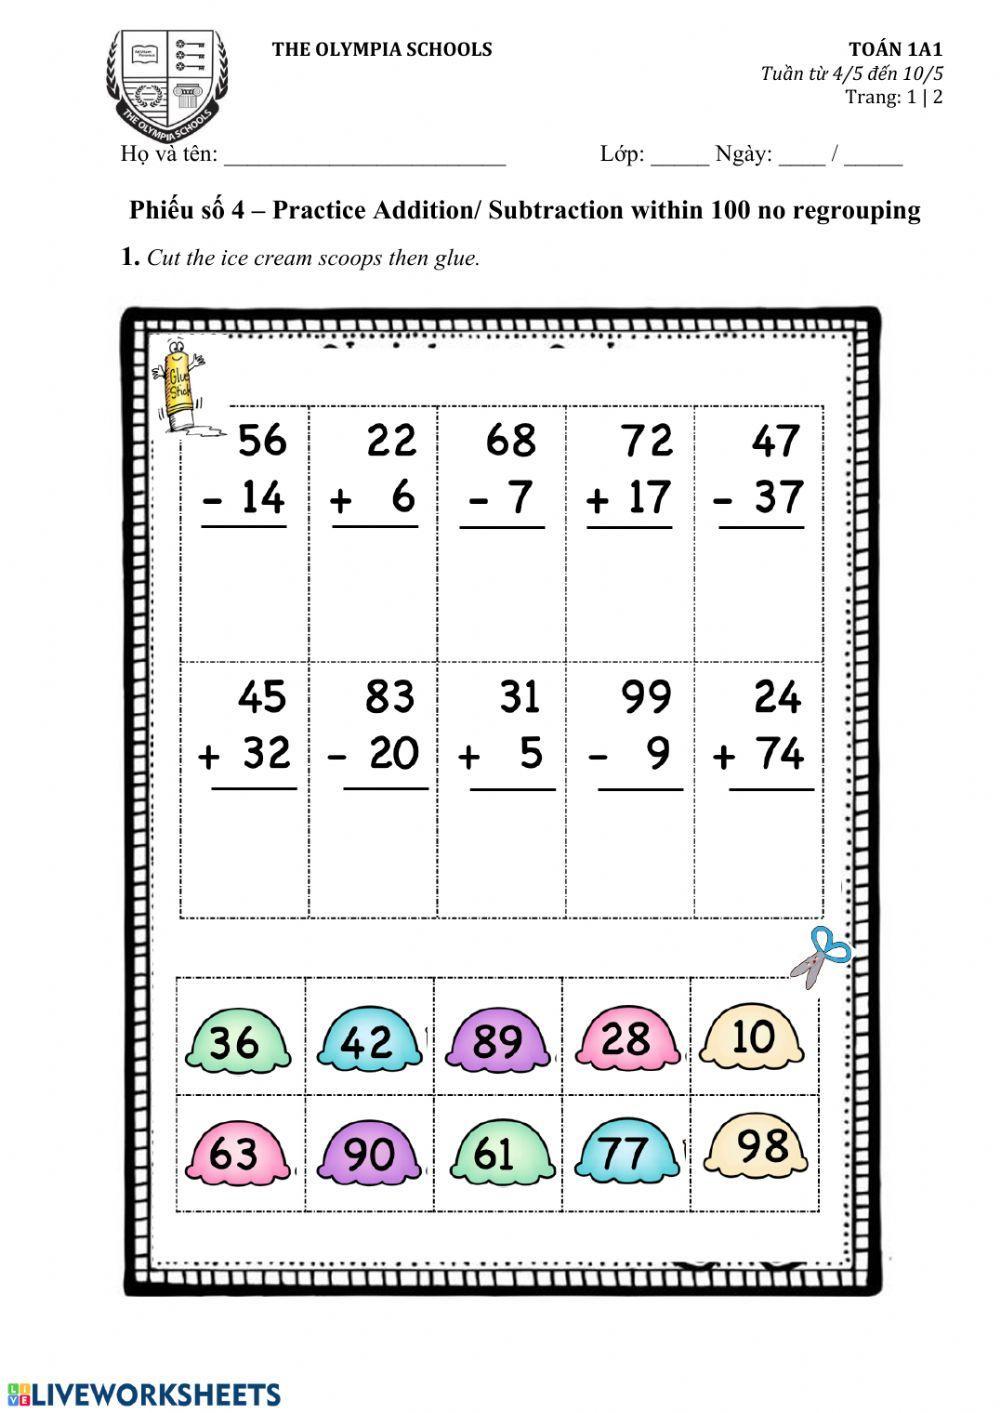 Practice Additon-Subtraction within 100 no regrouping